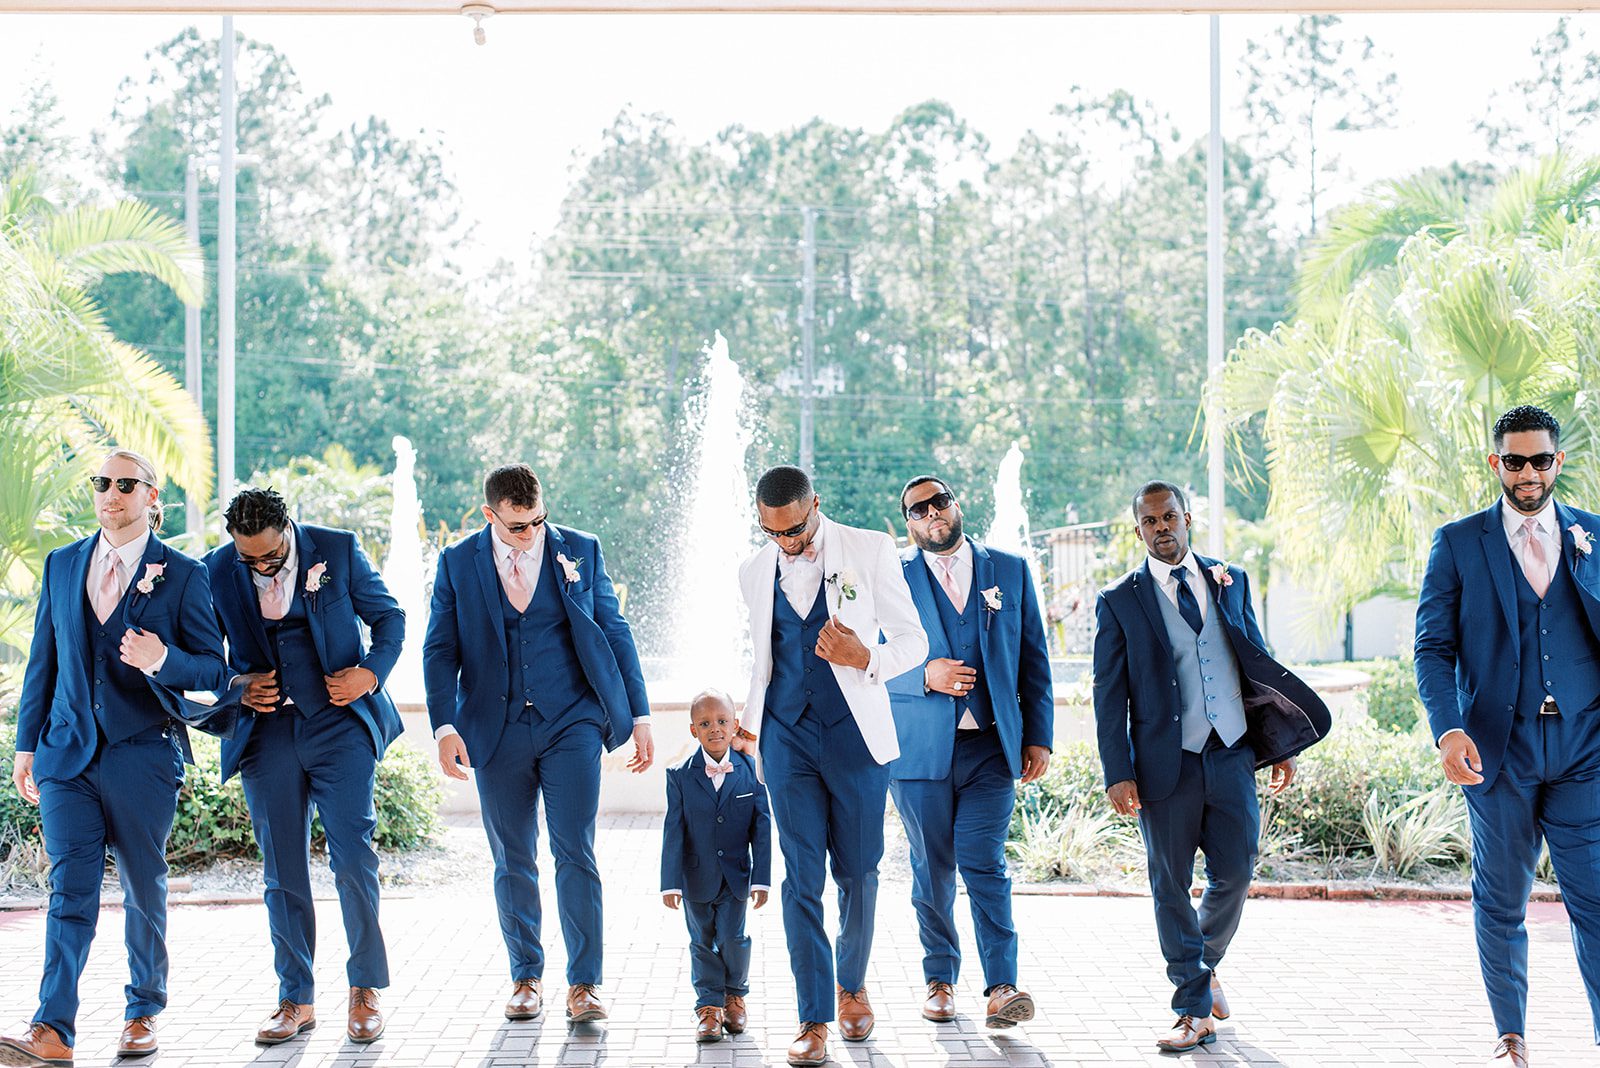 Groom and groomsmen posing for photos wearing navy tuxedos